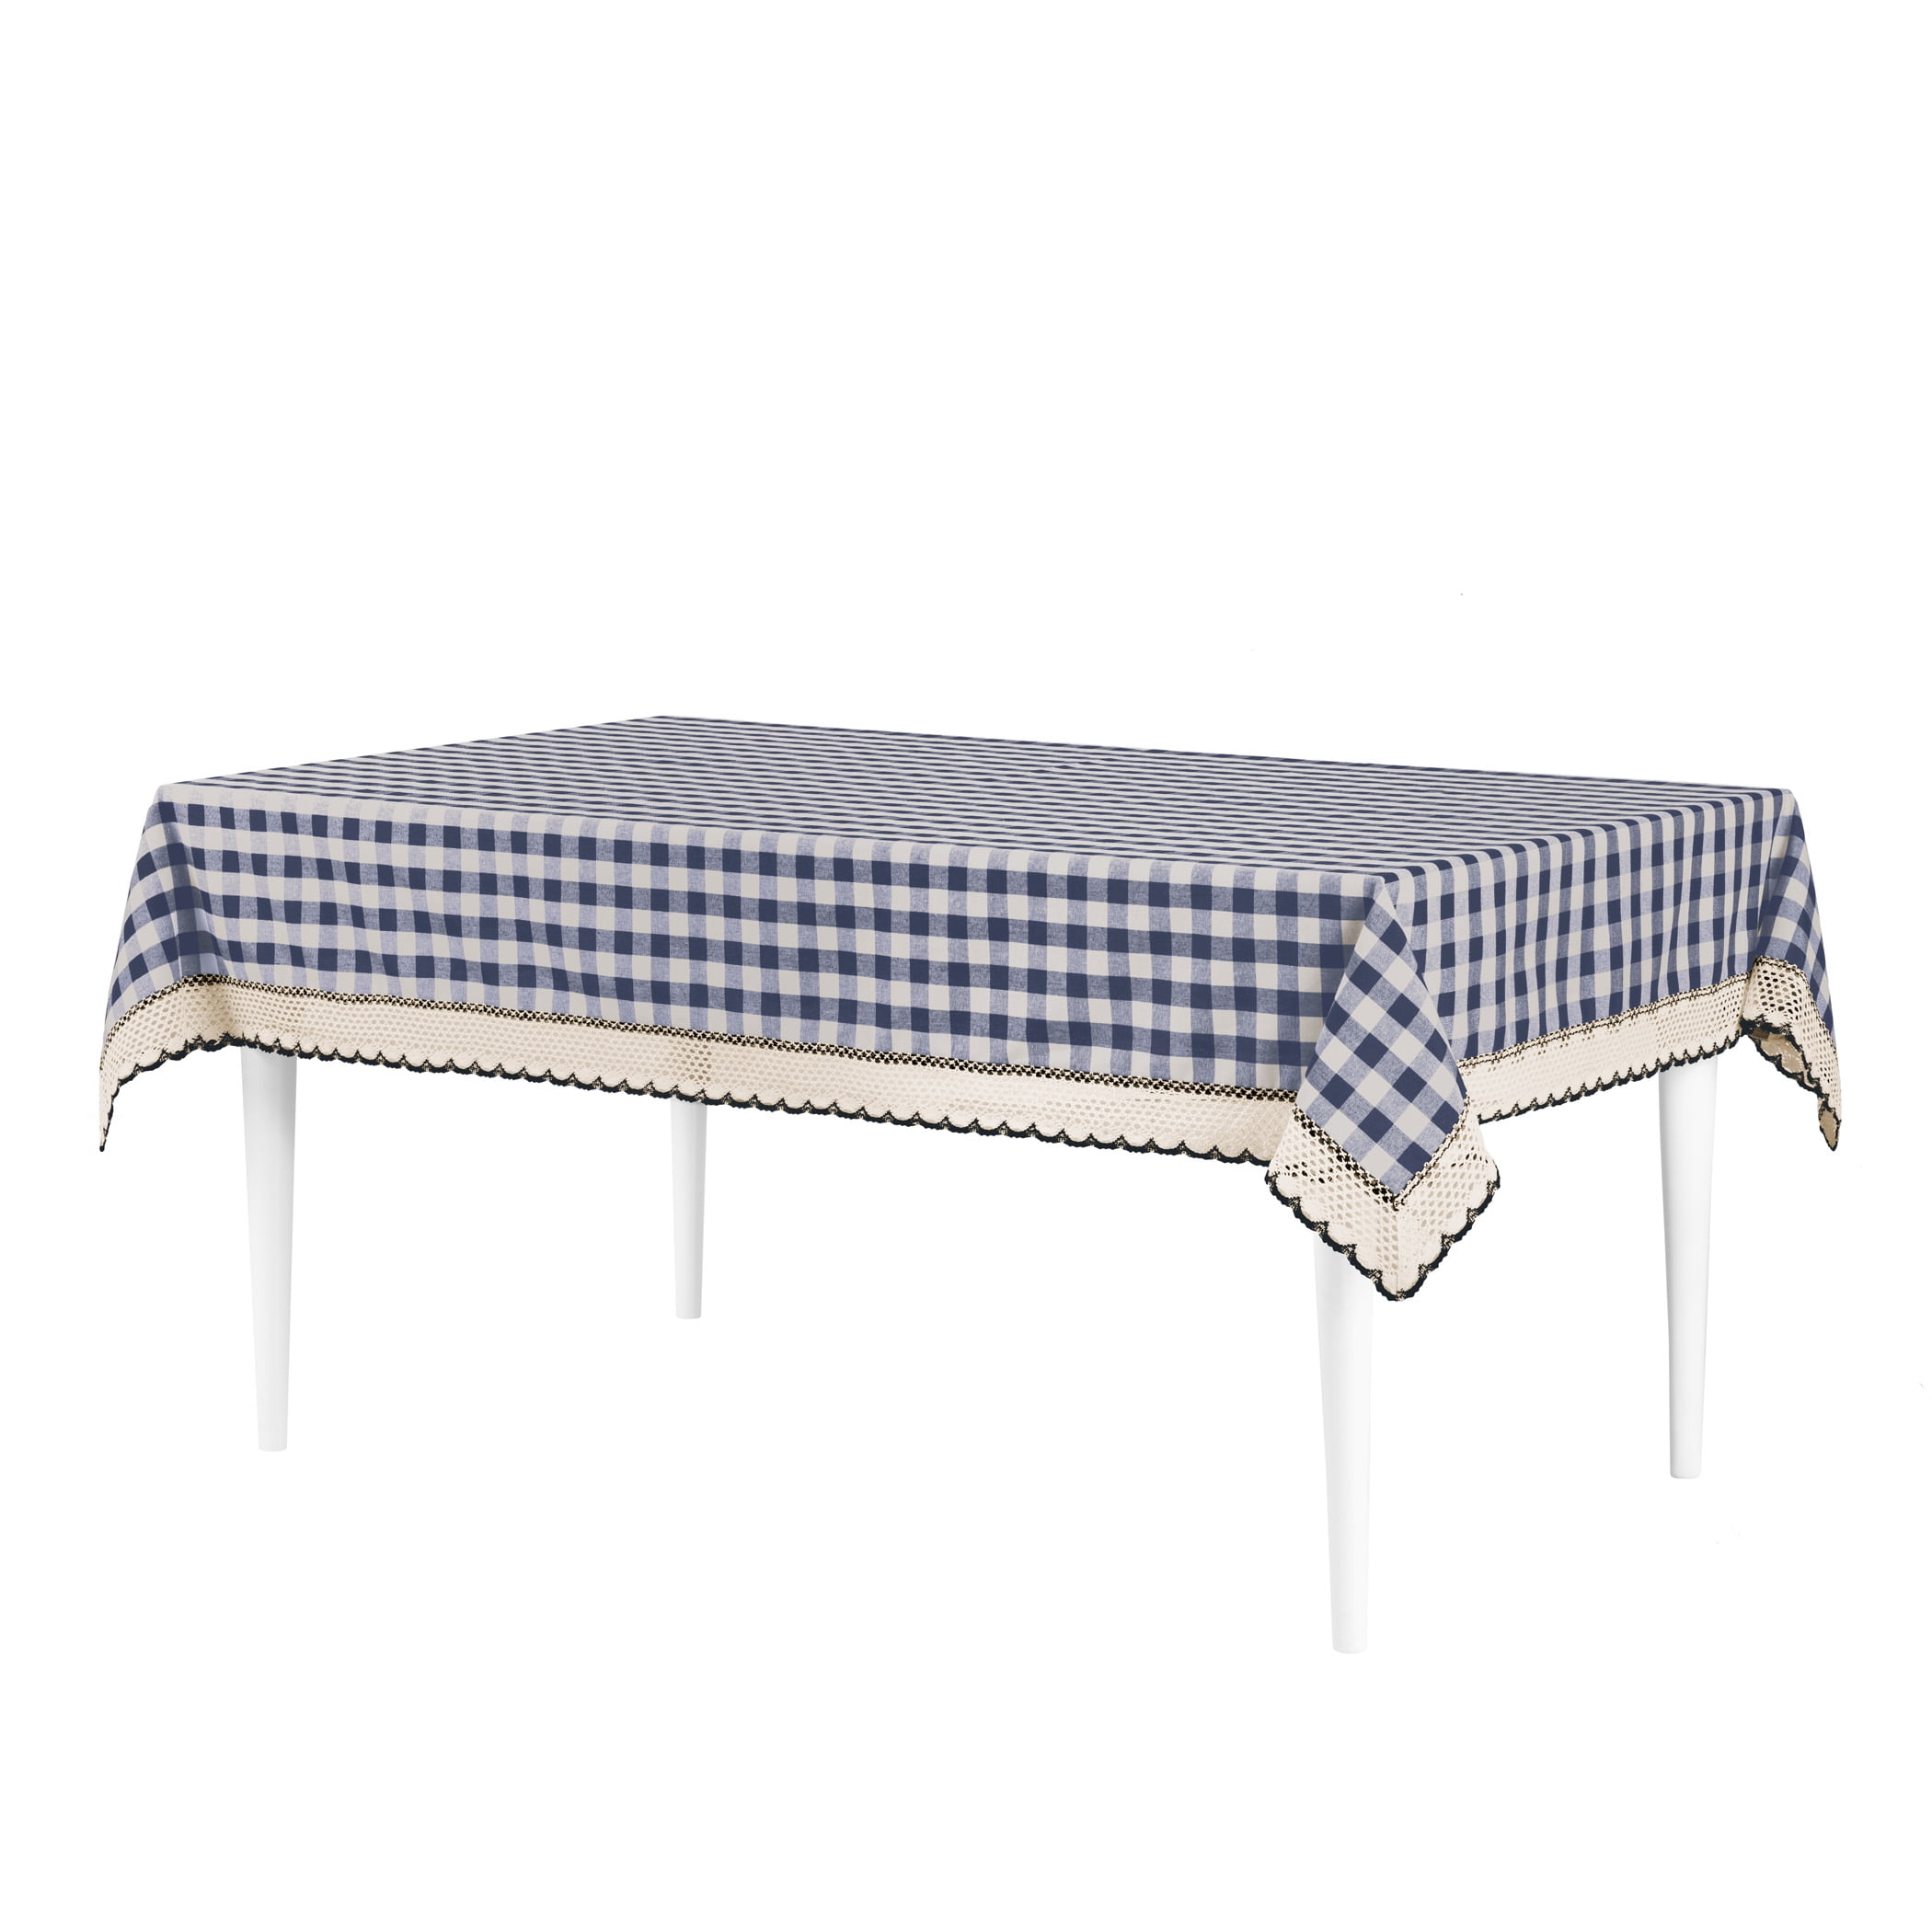 Picture of Achim BCT104NY24 60 x 104 in. Buffalo Check Tablecloth with Macram Trim Navy